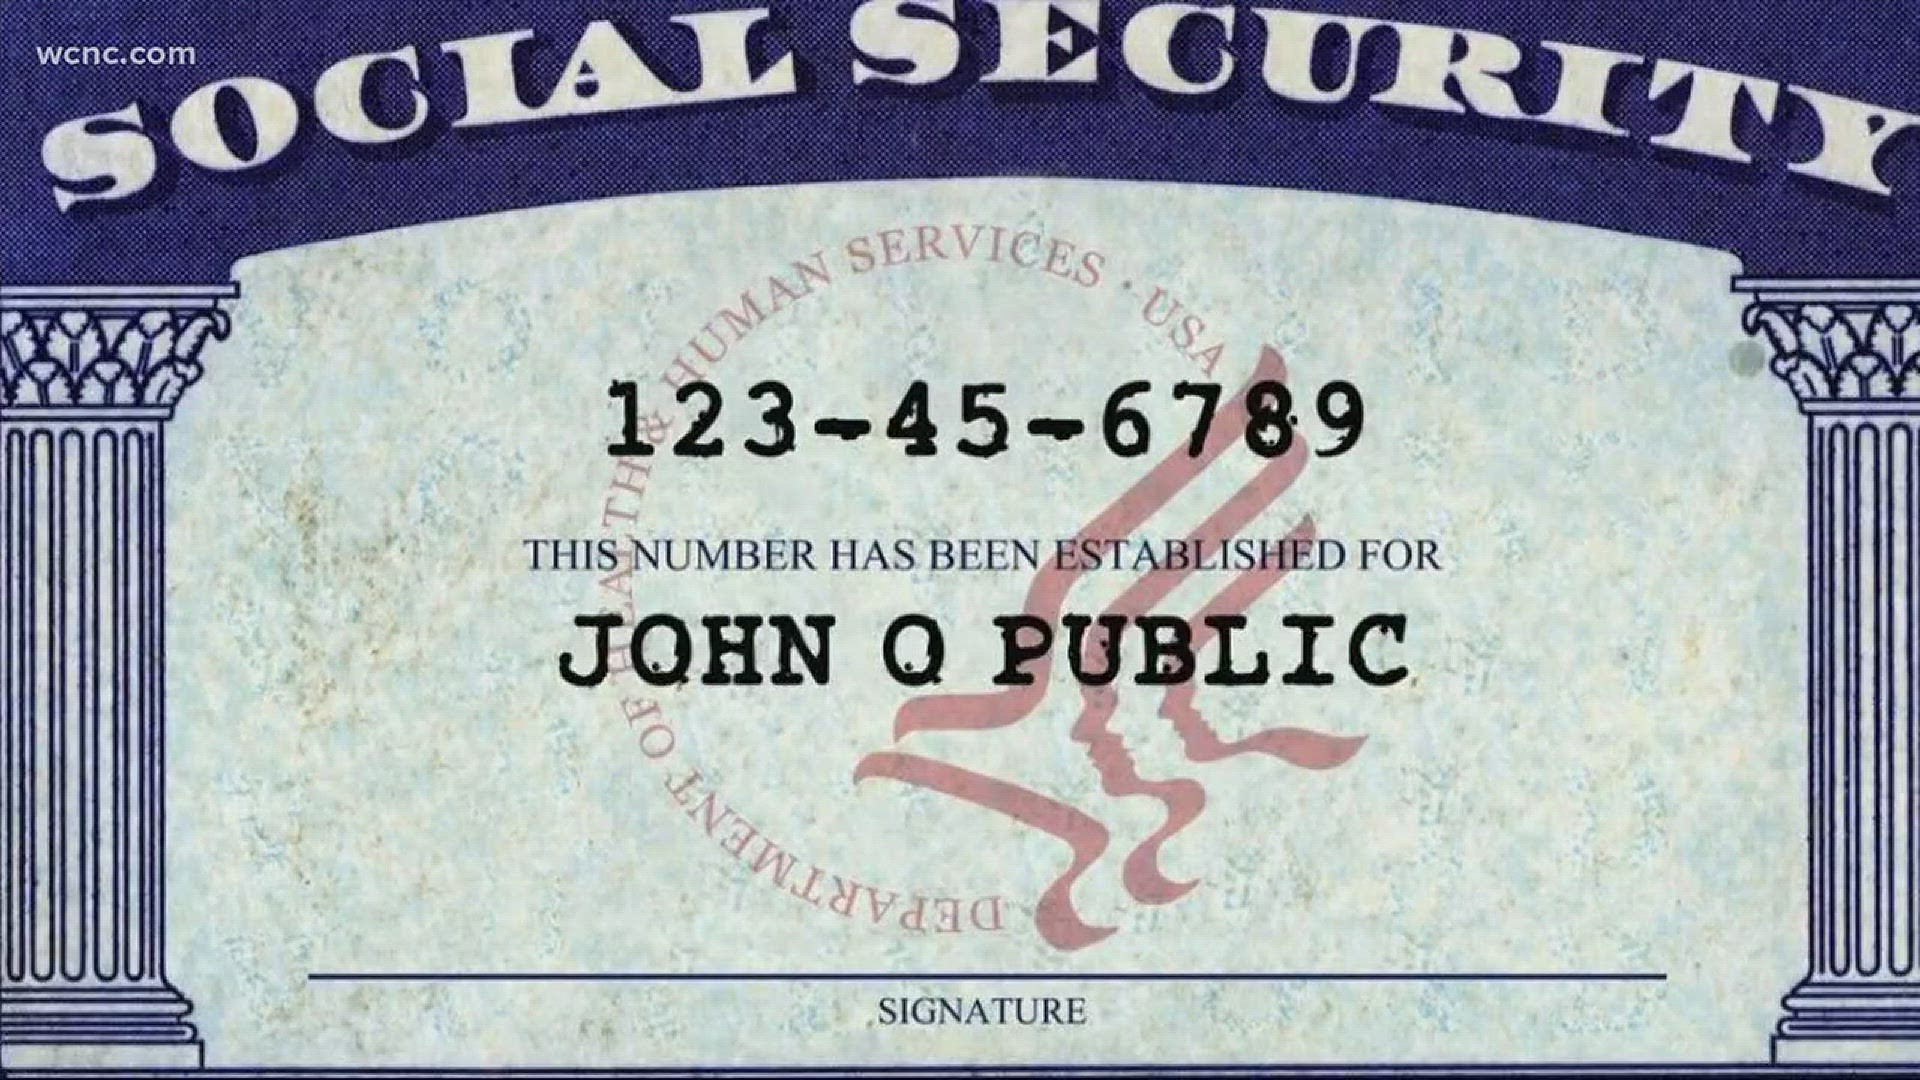 Doctors do not need your social security number